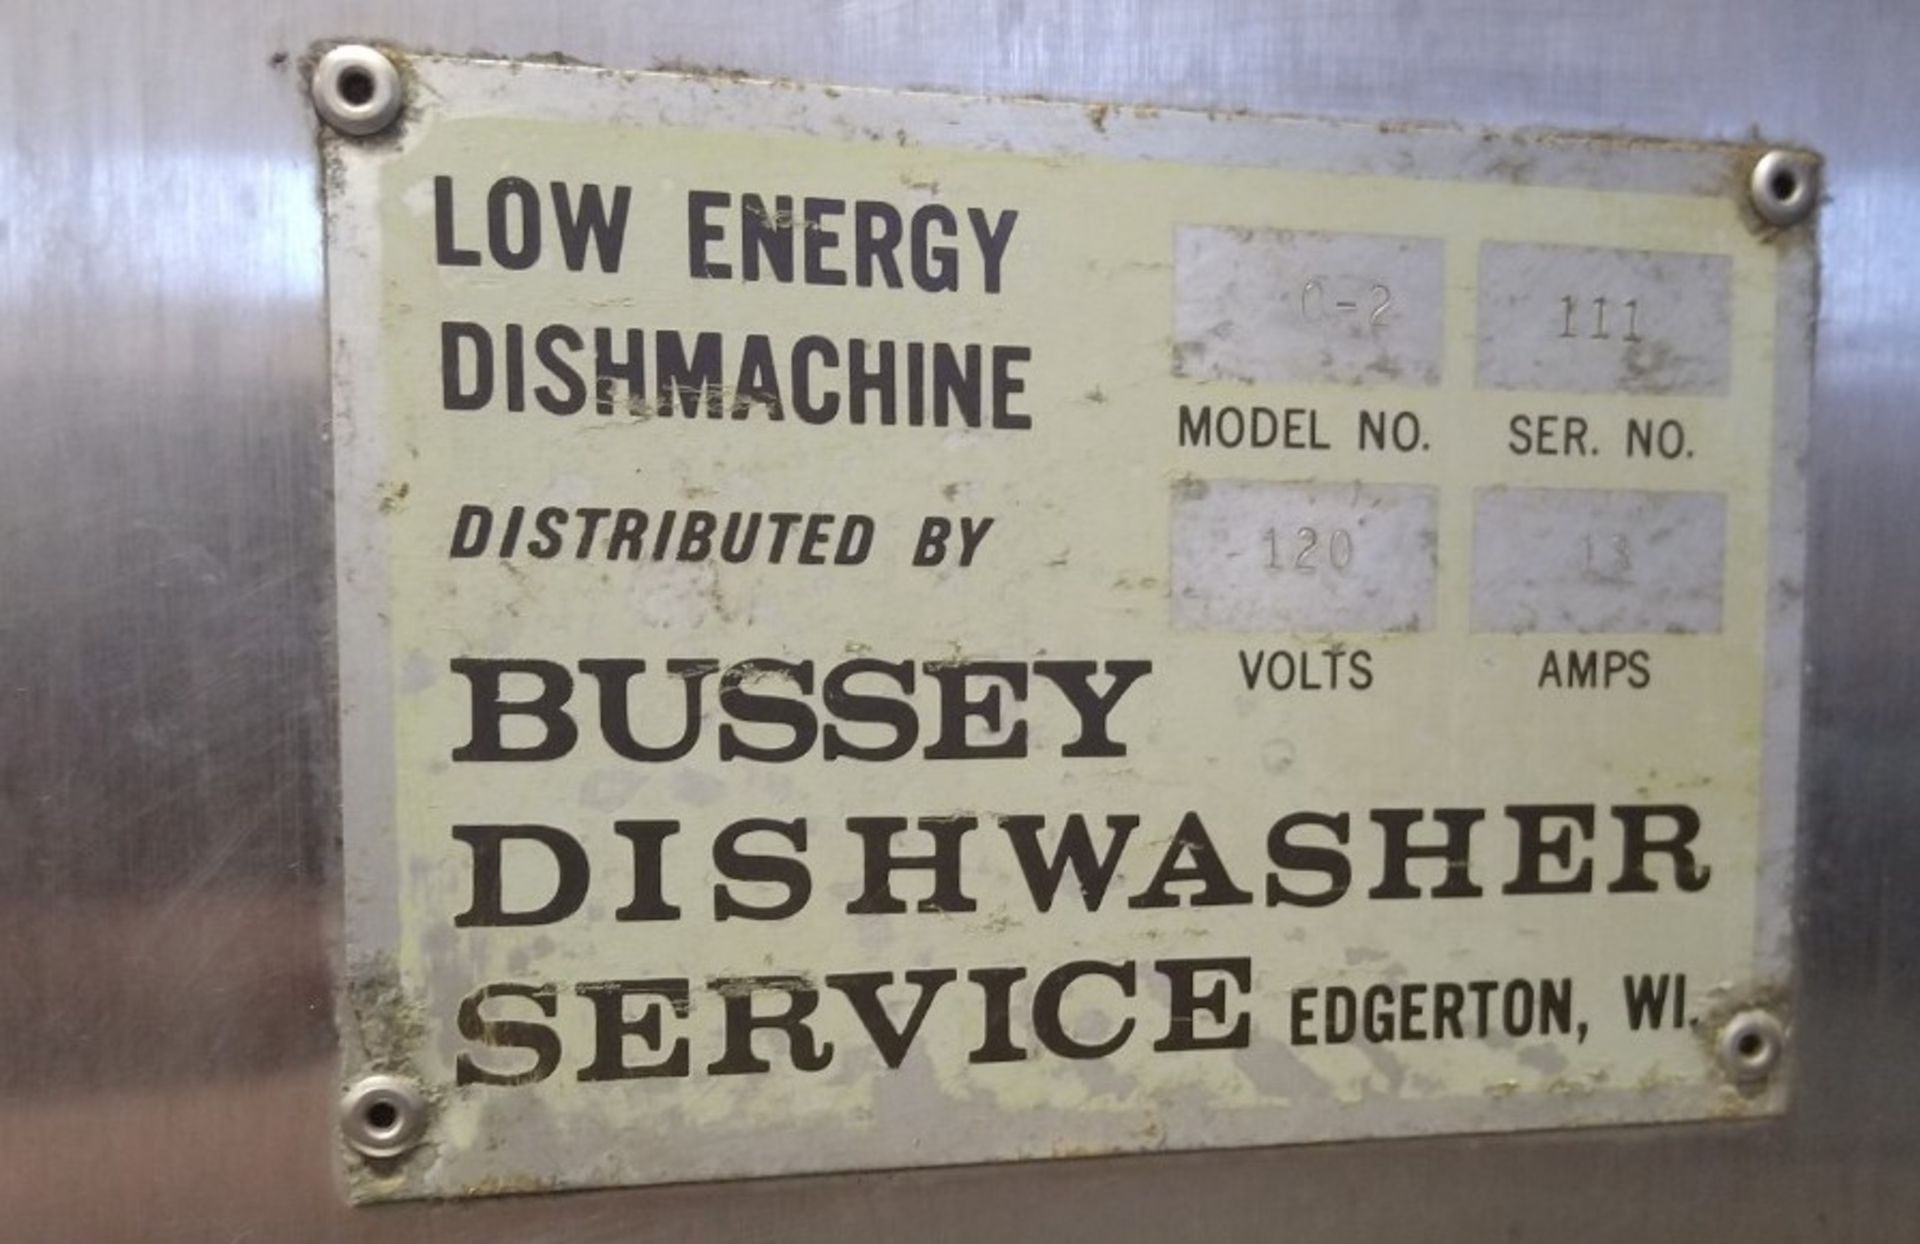 BUSSEY S/S DISHWASHER, MODEL 0-2, S/N 111, 120 V (LOCATED IN MADISON, WI)(RIG FEE: $150) - Image 2 of 2